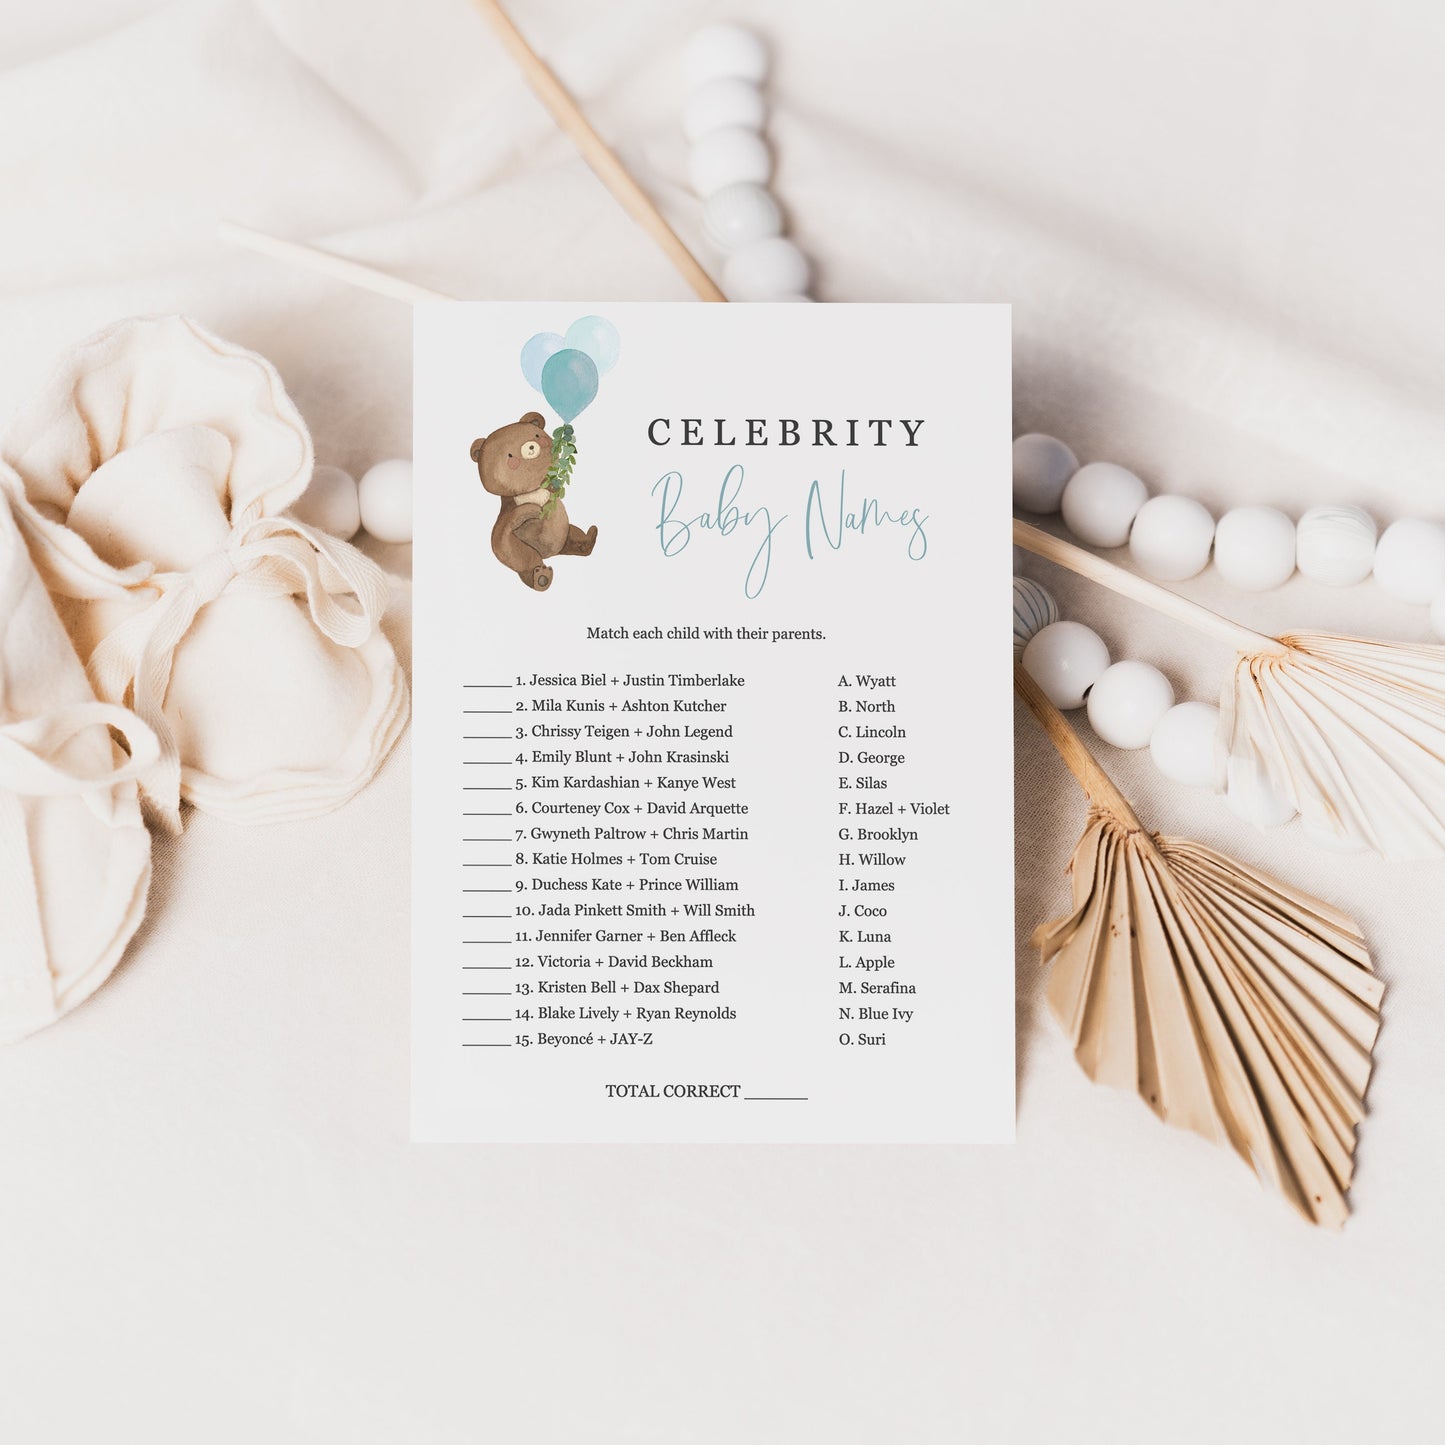 Editable Celebrity Baby Names Matching Game Teddy Bear Baby Shower Games Bear Balloons Template